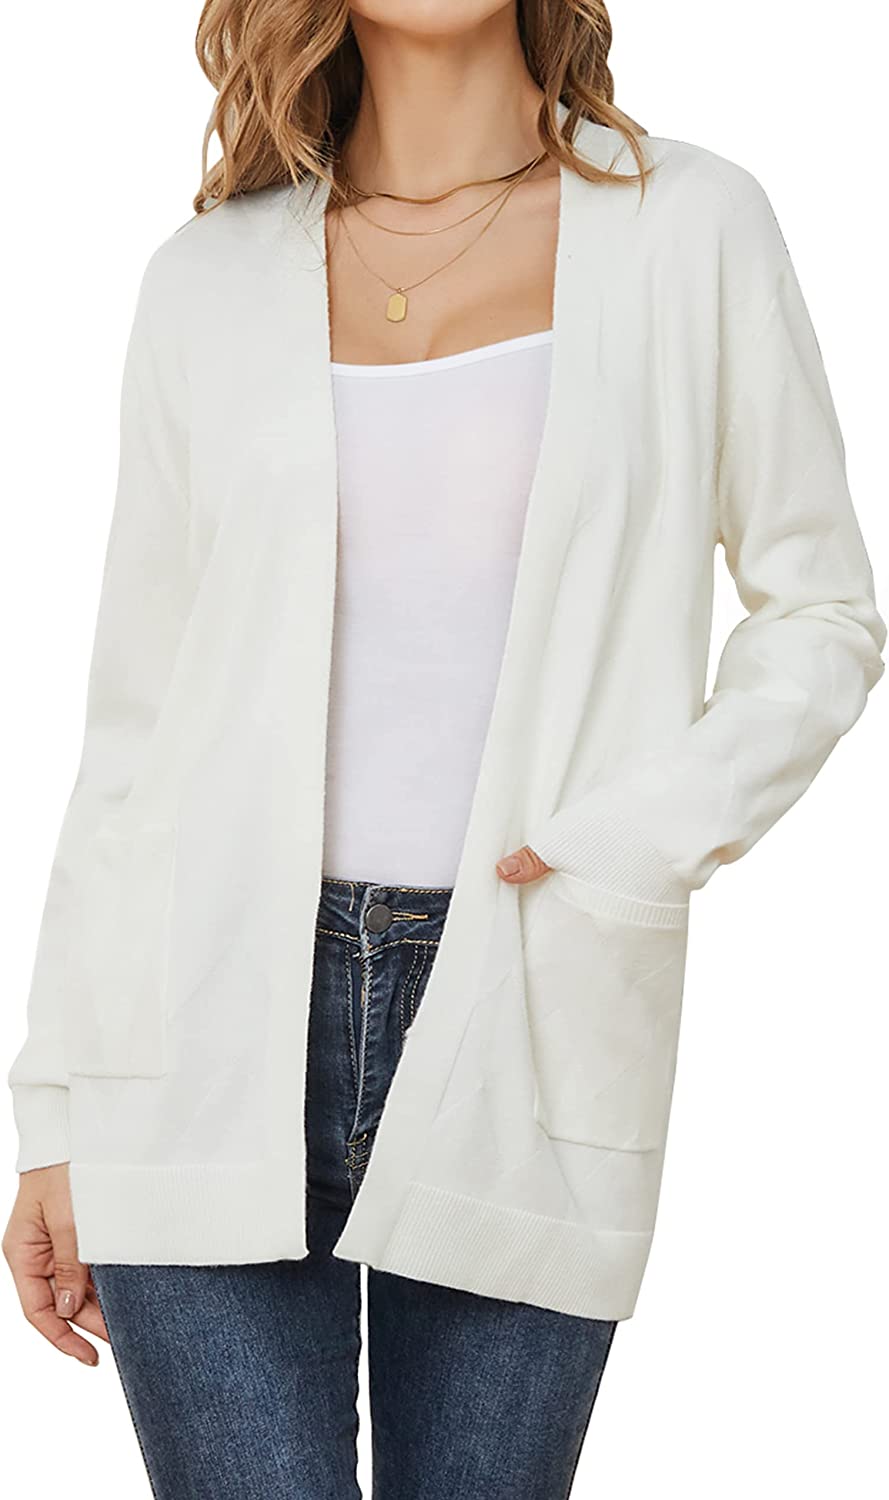 Womens Long Sleeve Cardigan Sweater - Open Front Lightweight Zic Zac Knitted Cardigan with Pockets